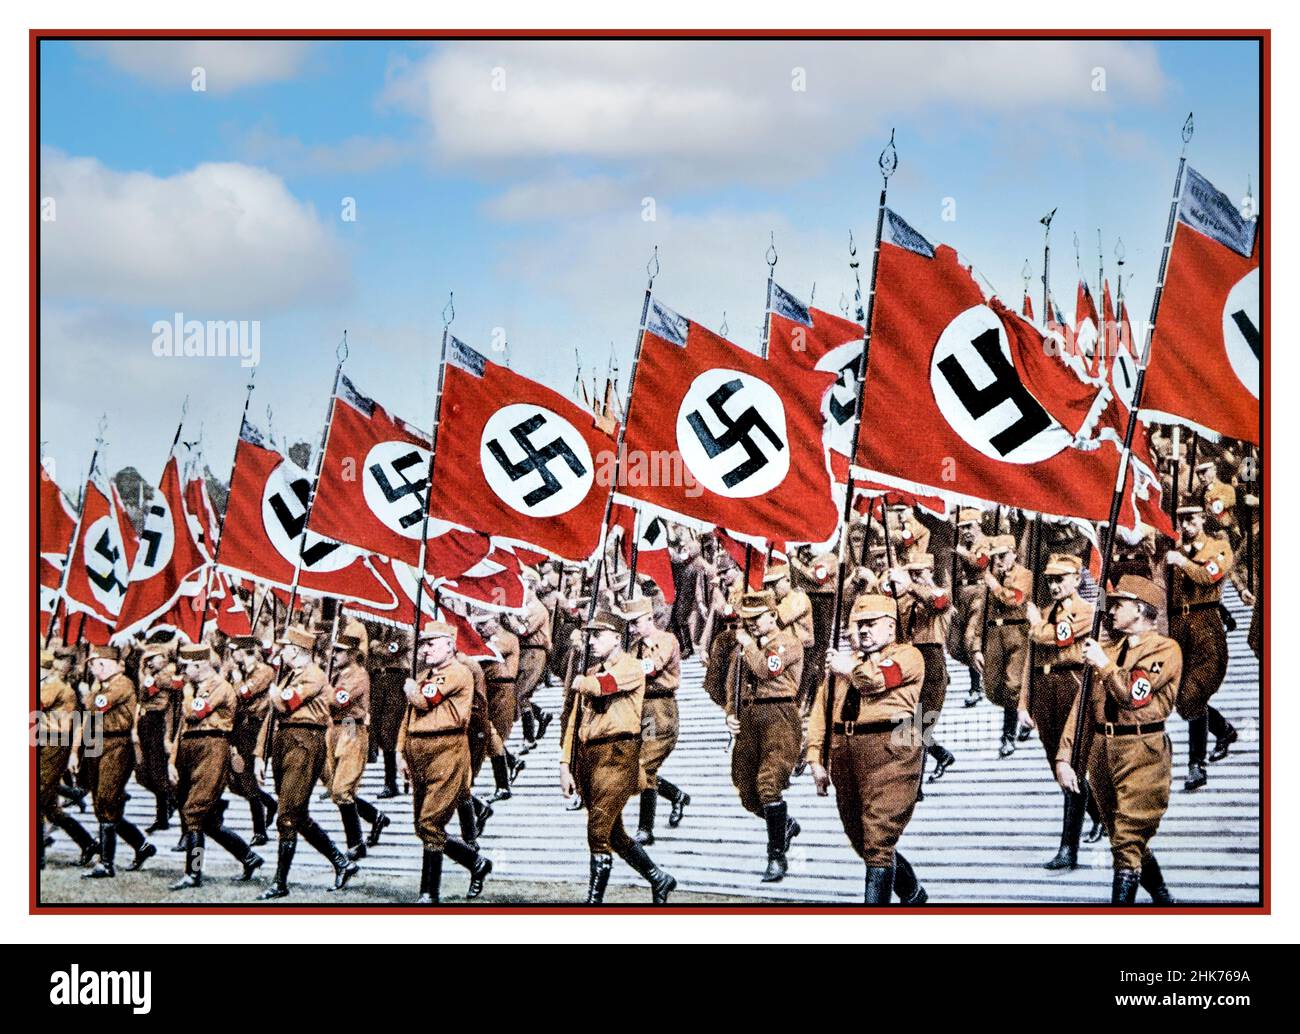 Sturmabteilung SA Troops Vintage Propaganda  Nazi German Sturmabteilung SA Troops marching with Nazi Swastika Flags at Nazi Rally Nuremberg Germany 1933. Used as headline image for propaganda film Triumph of the Will (Triumph des Willens) a 1935 film made by Leni Riefenstahl. Stock Photo